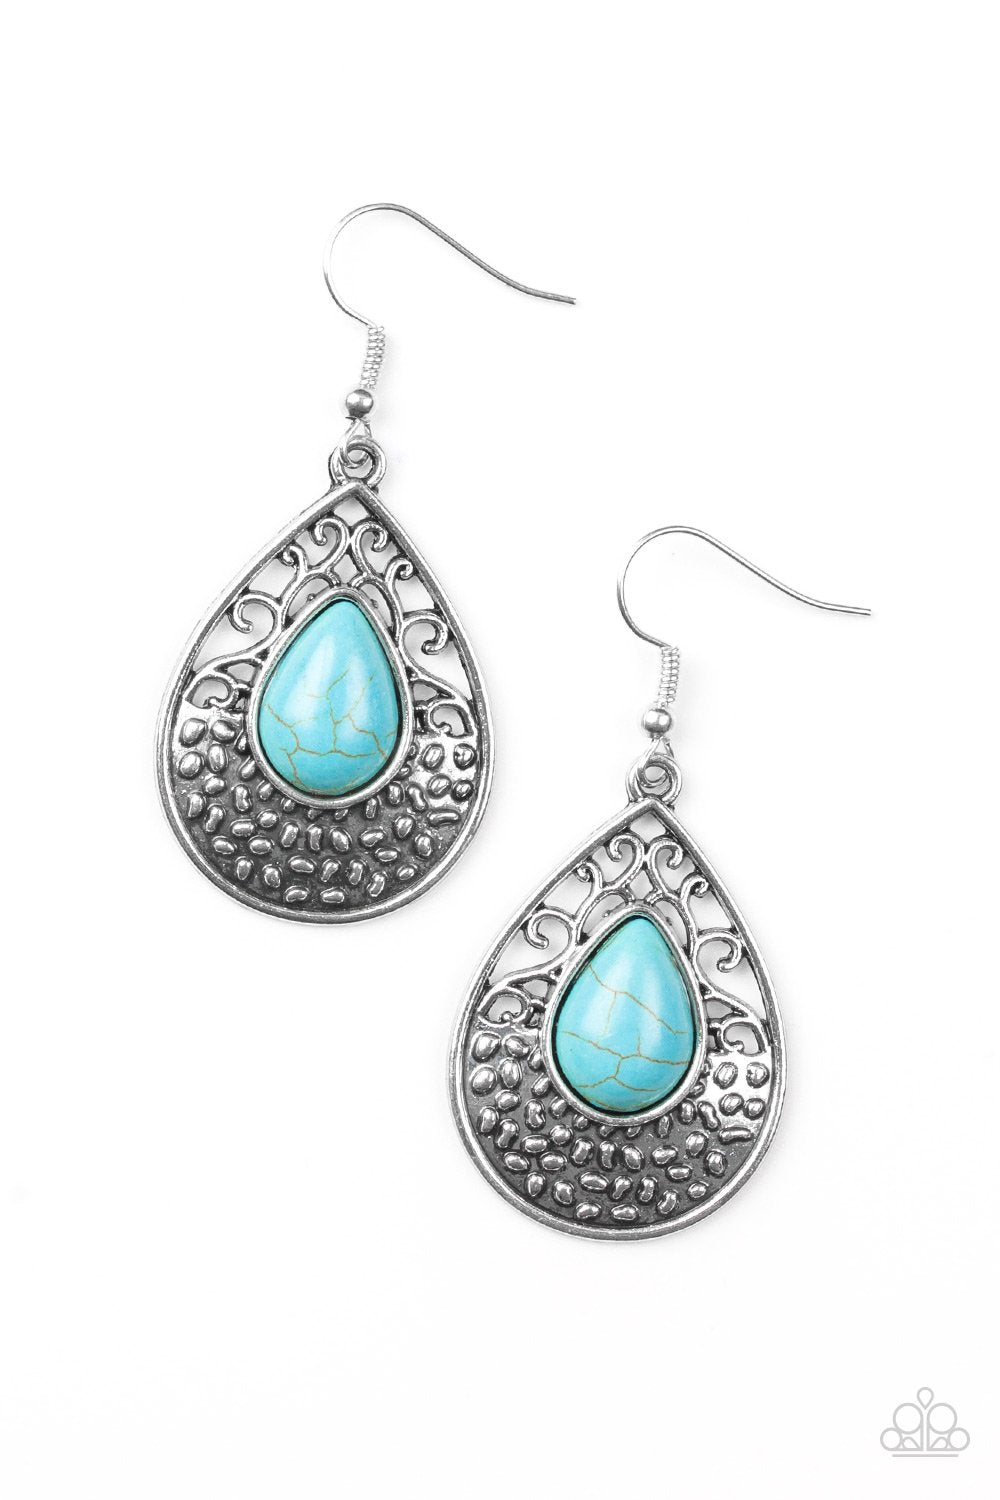 Tucson Tunes Silver and Turquoise Blue Stone Teardrop Earrings - Paparazzi Accessories-CarasShop.com - $5 Jewelry by Cara Jewels